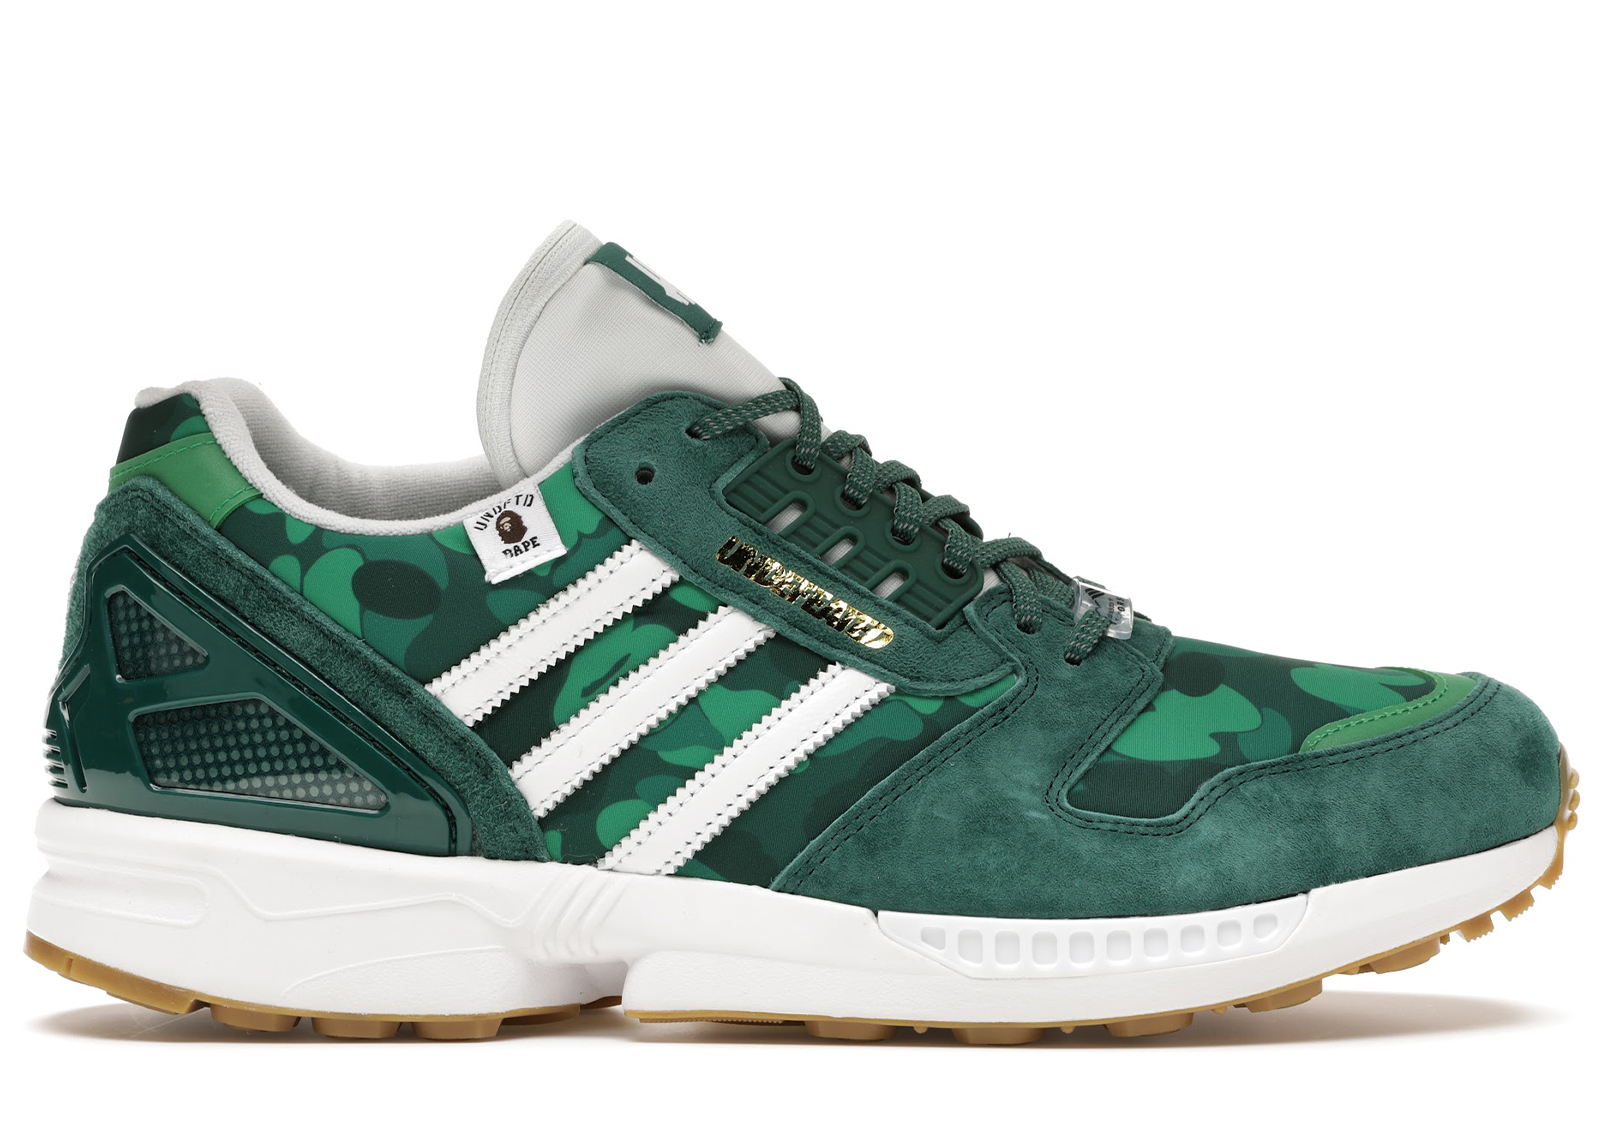 adidas ZX 8000 Bape Undefeated Green Men's - FY8851 - US